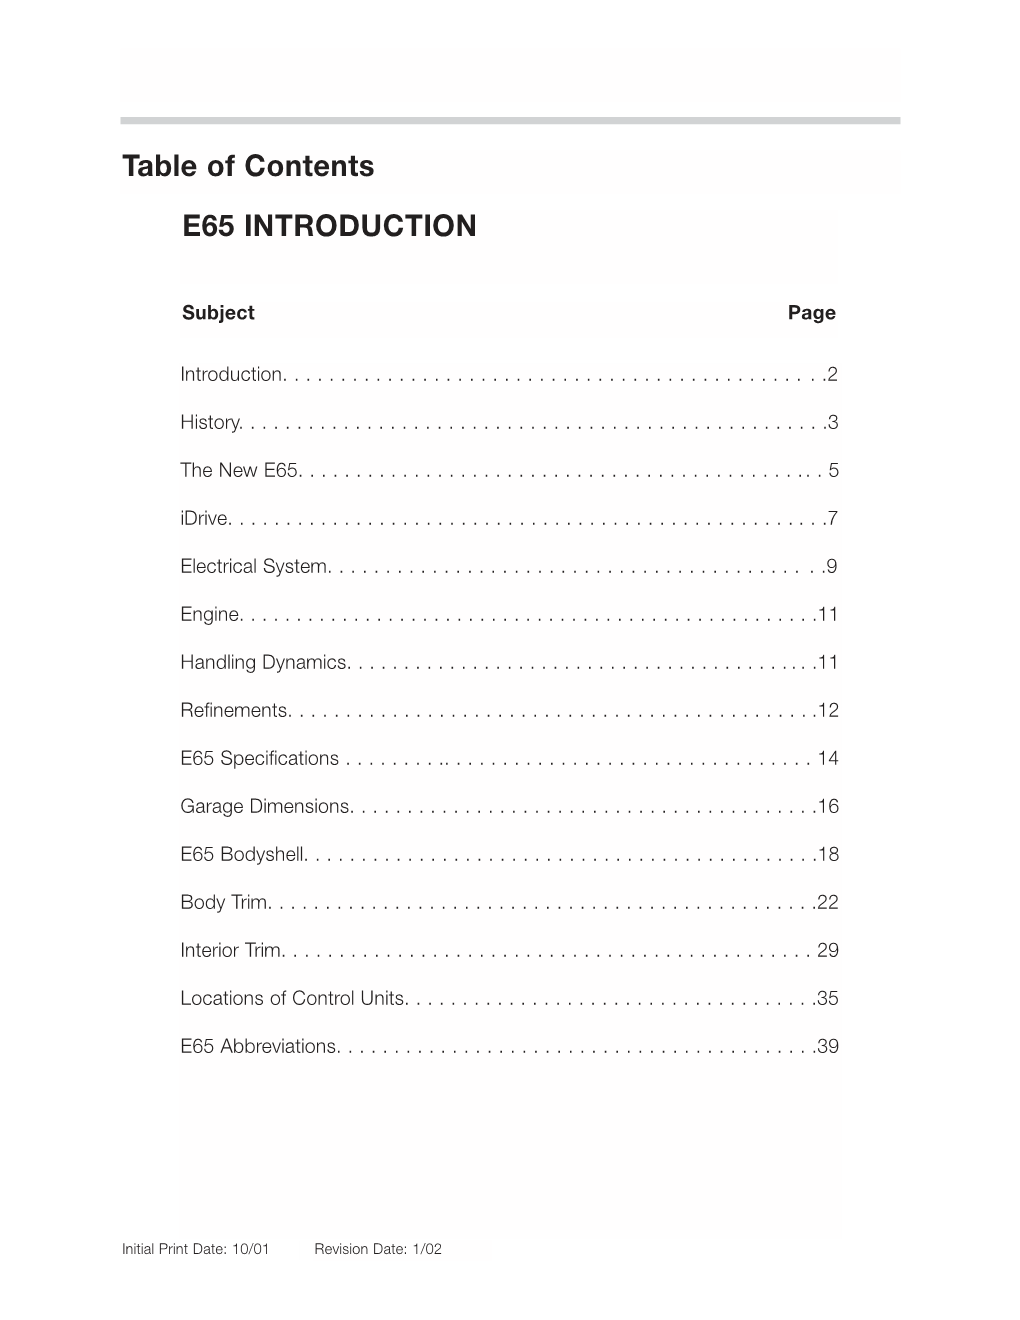 Table of Contents E65 INTRODUCTION